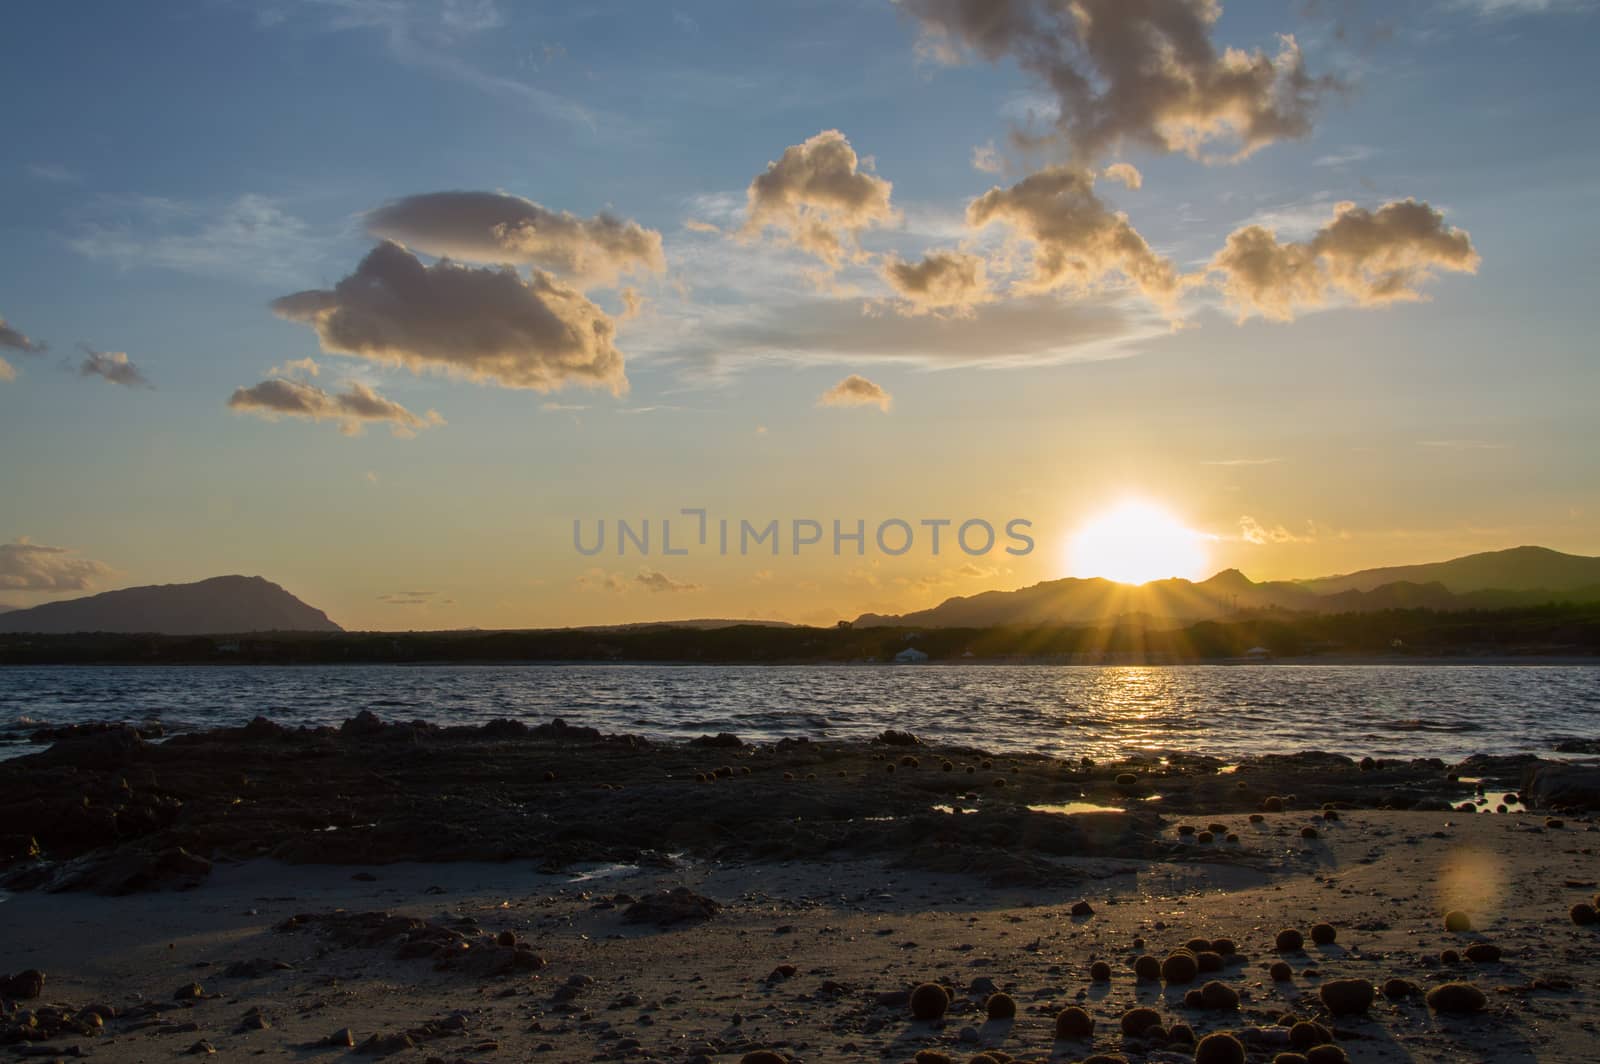 sunset in Cala Liberotto by Faurinz